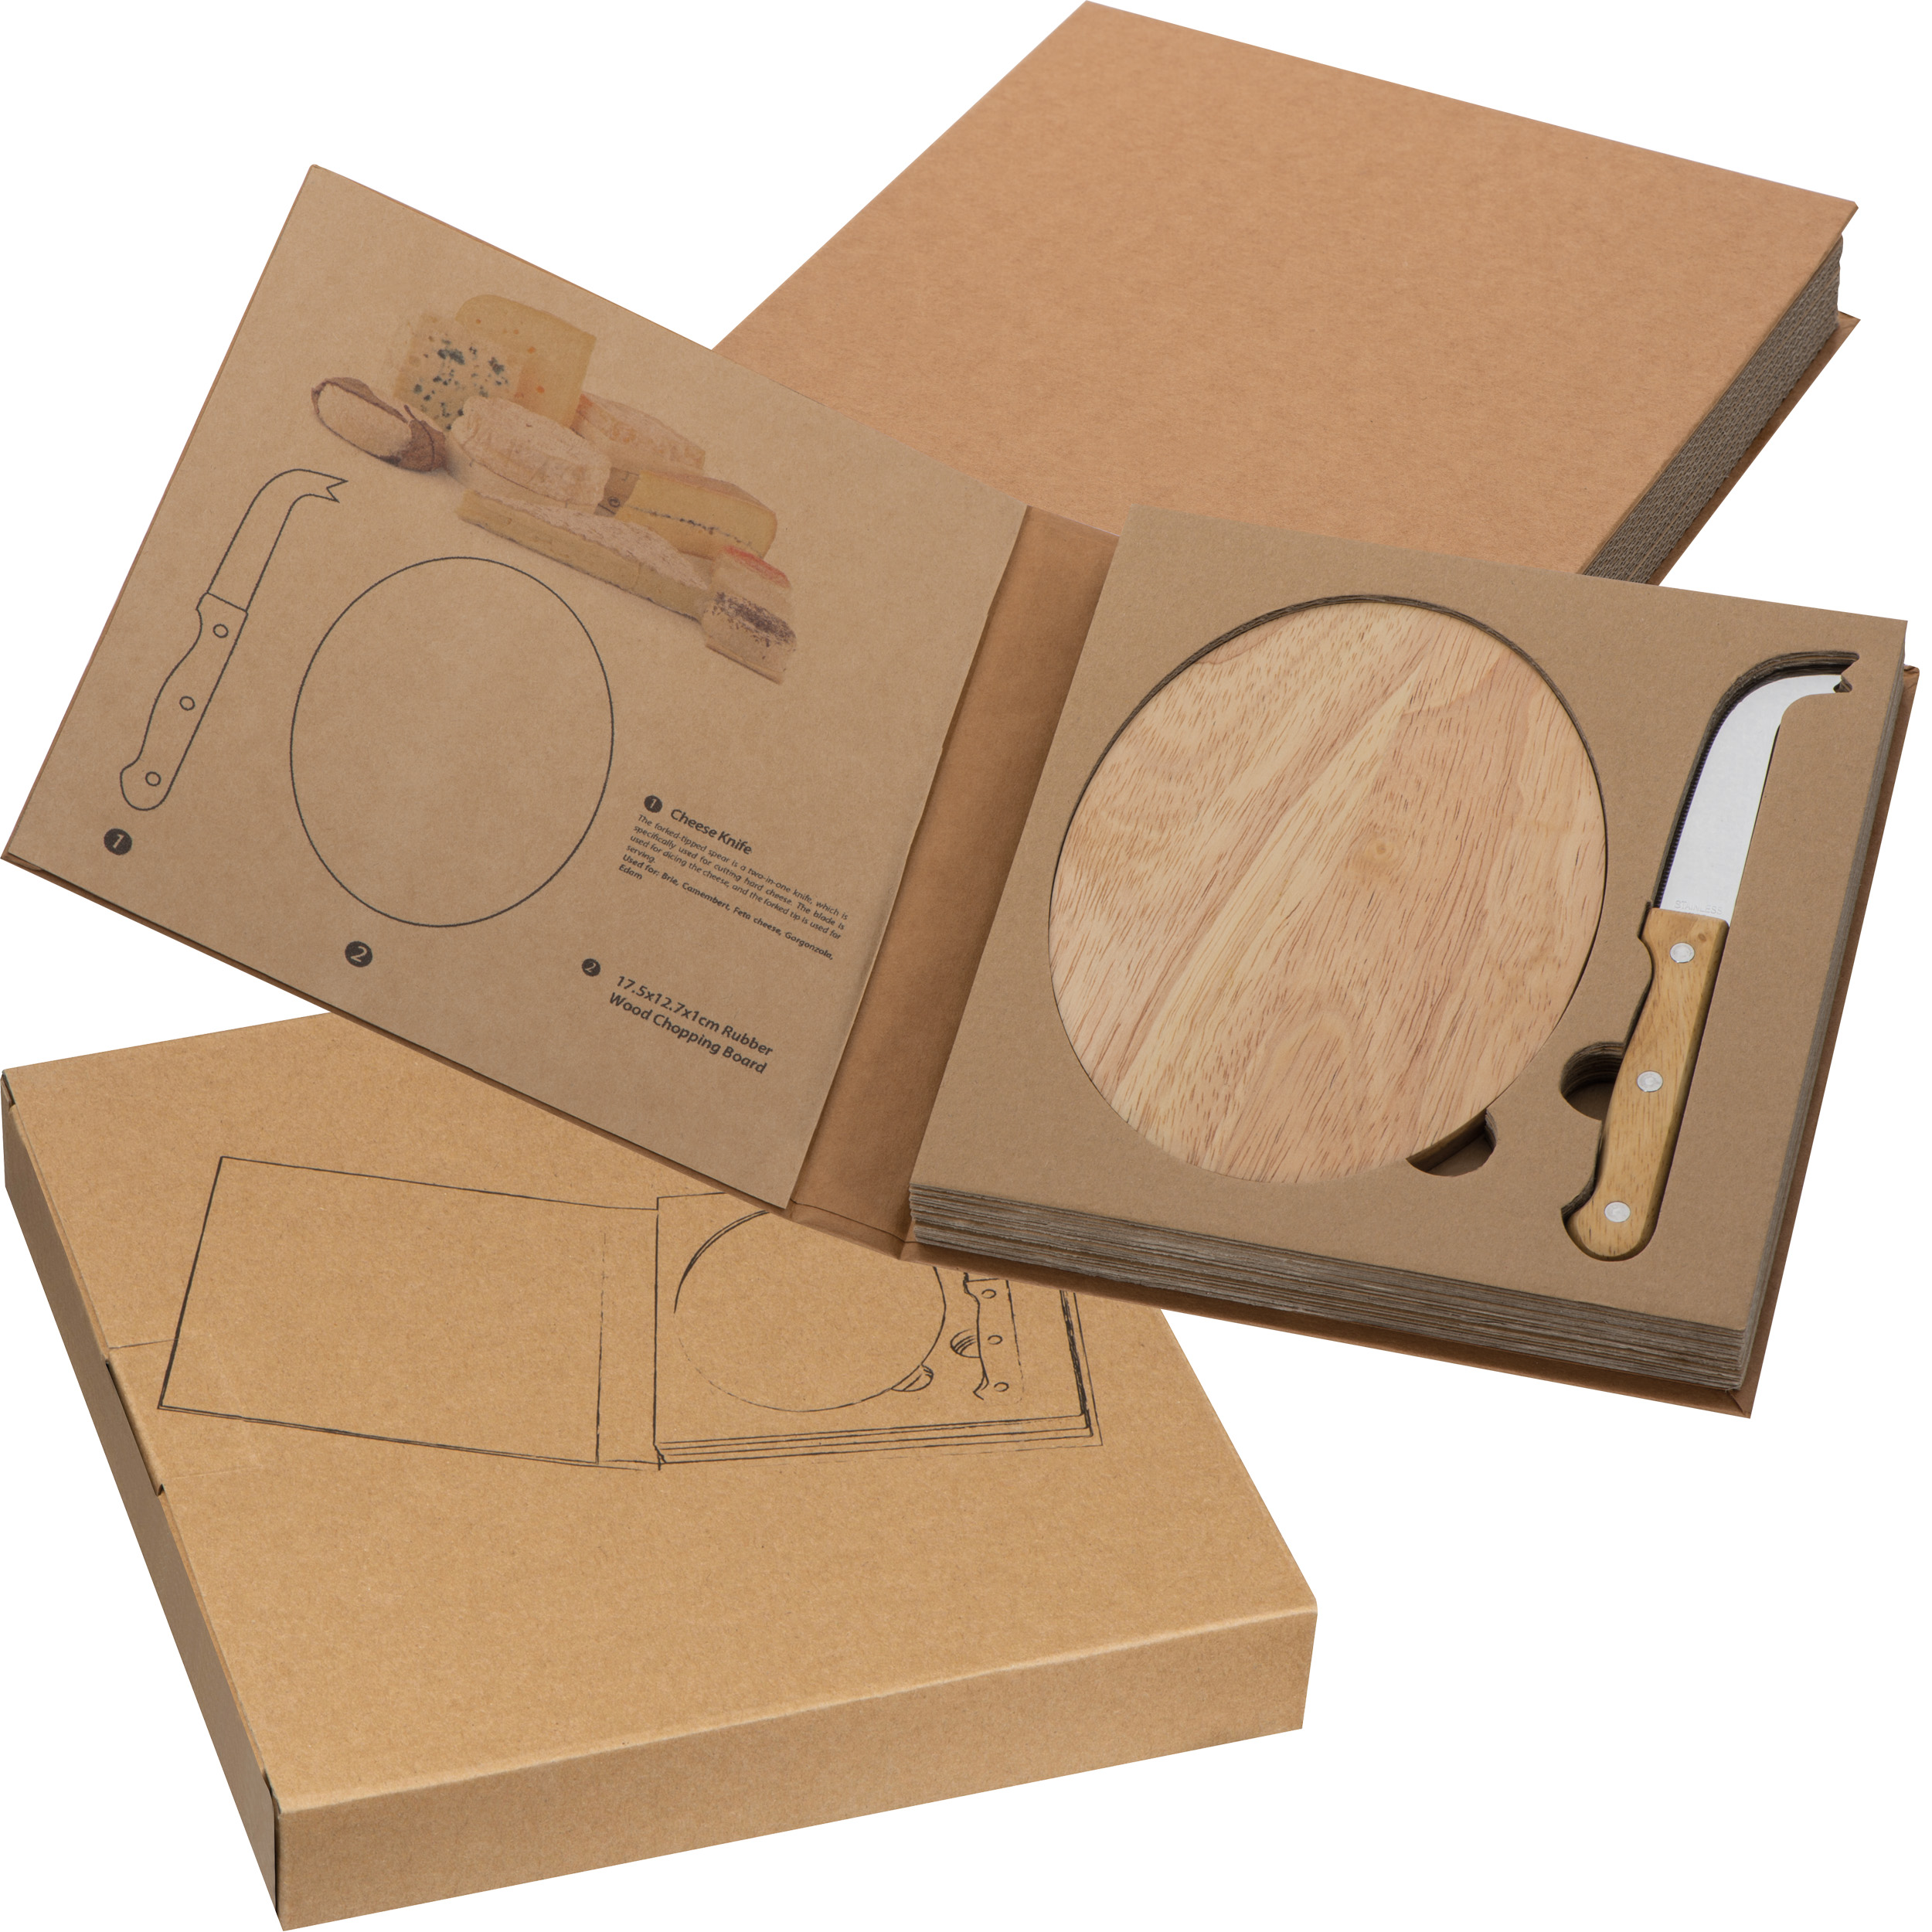 Cheese set with wooden cutting board